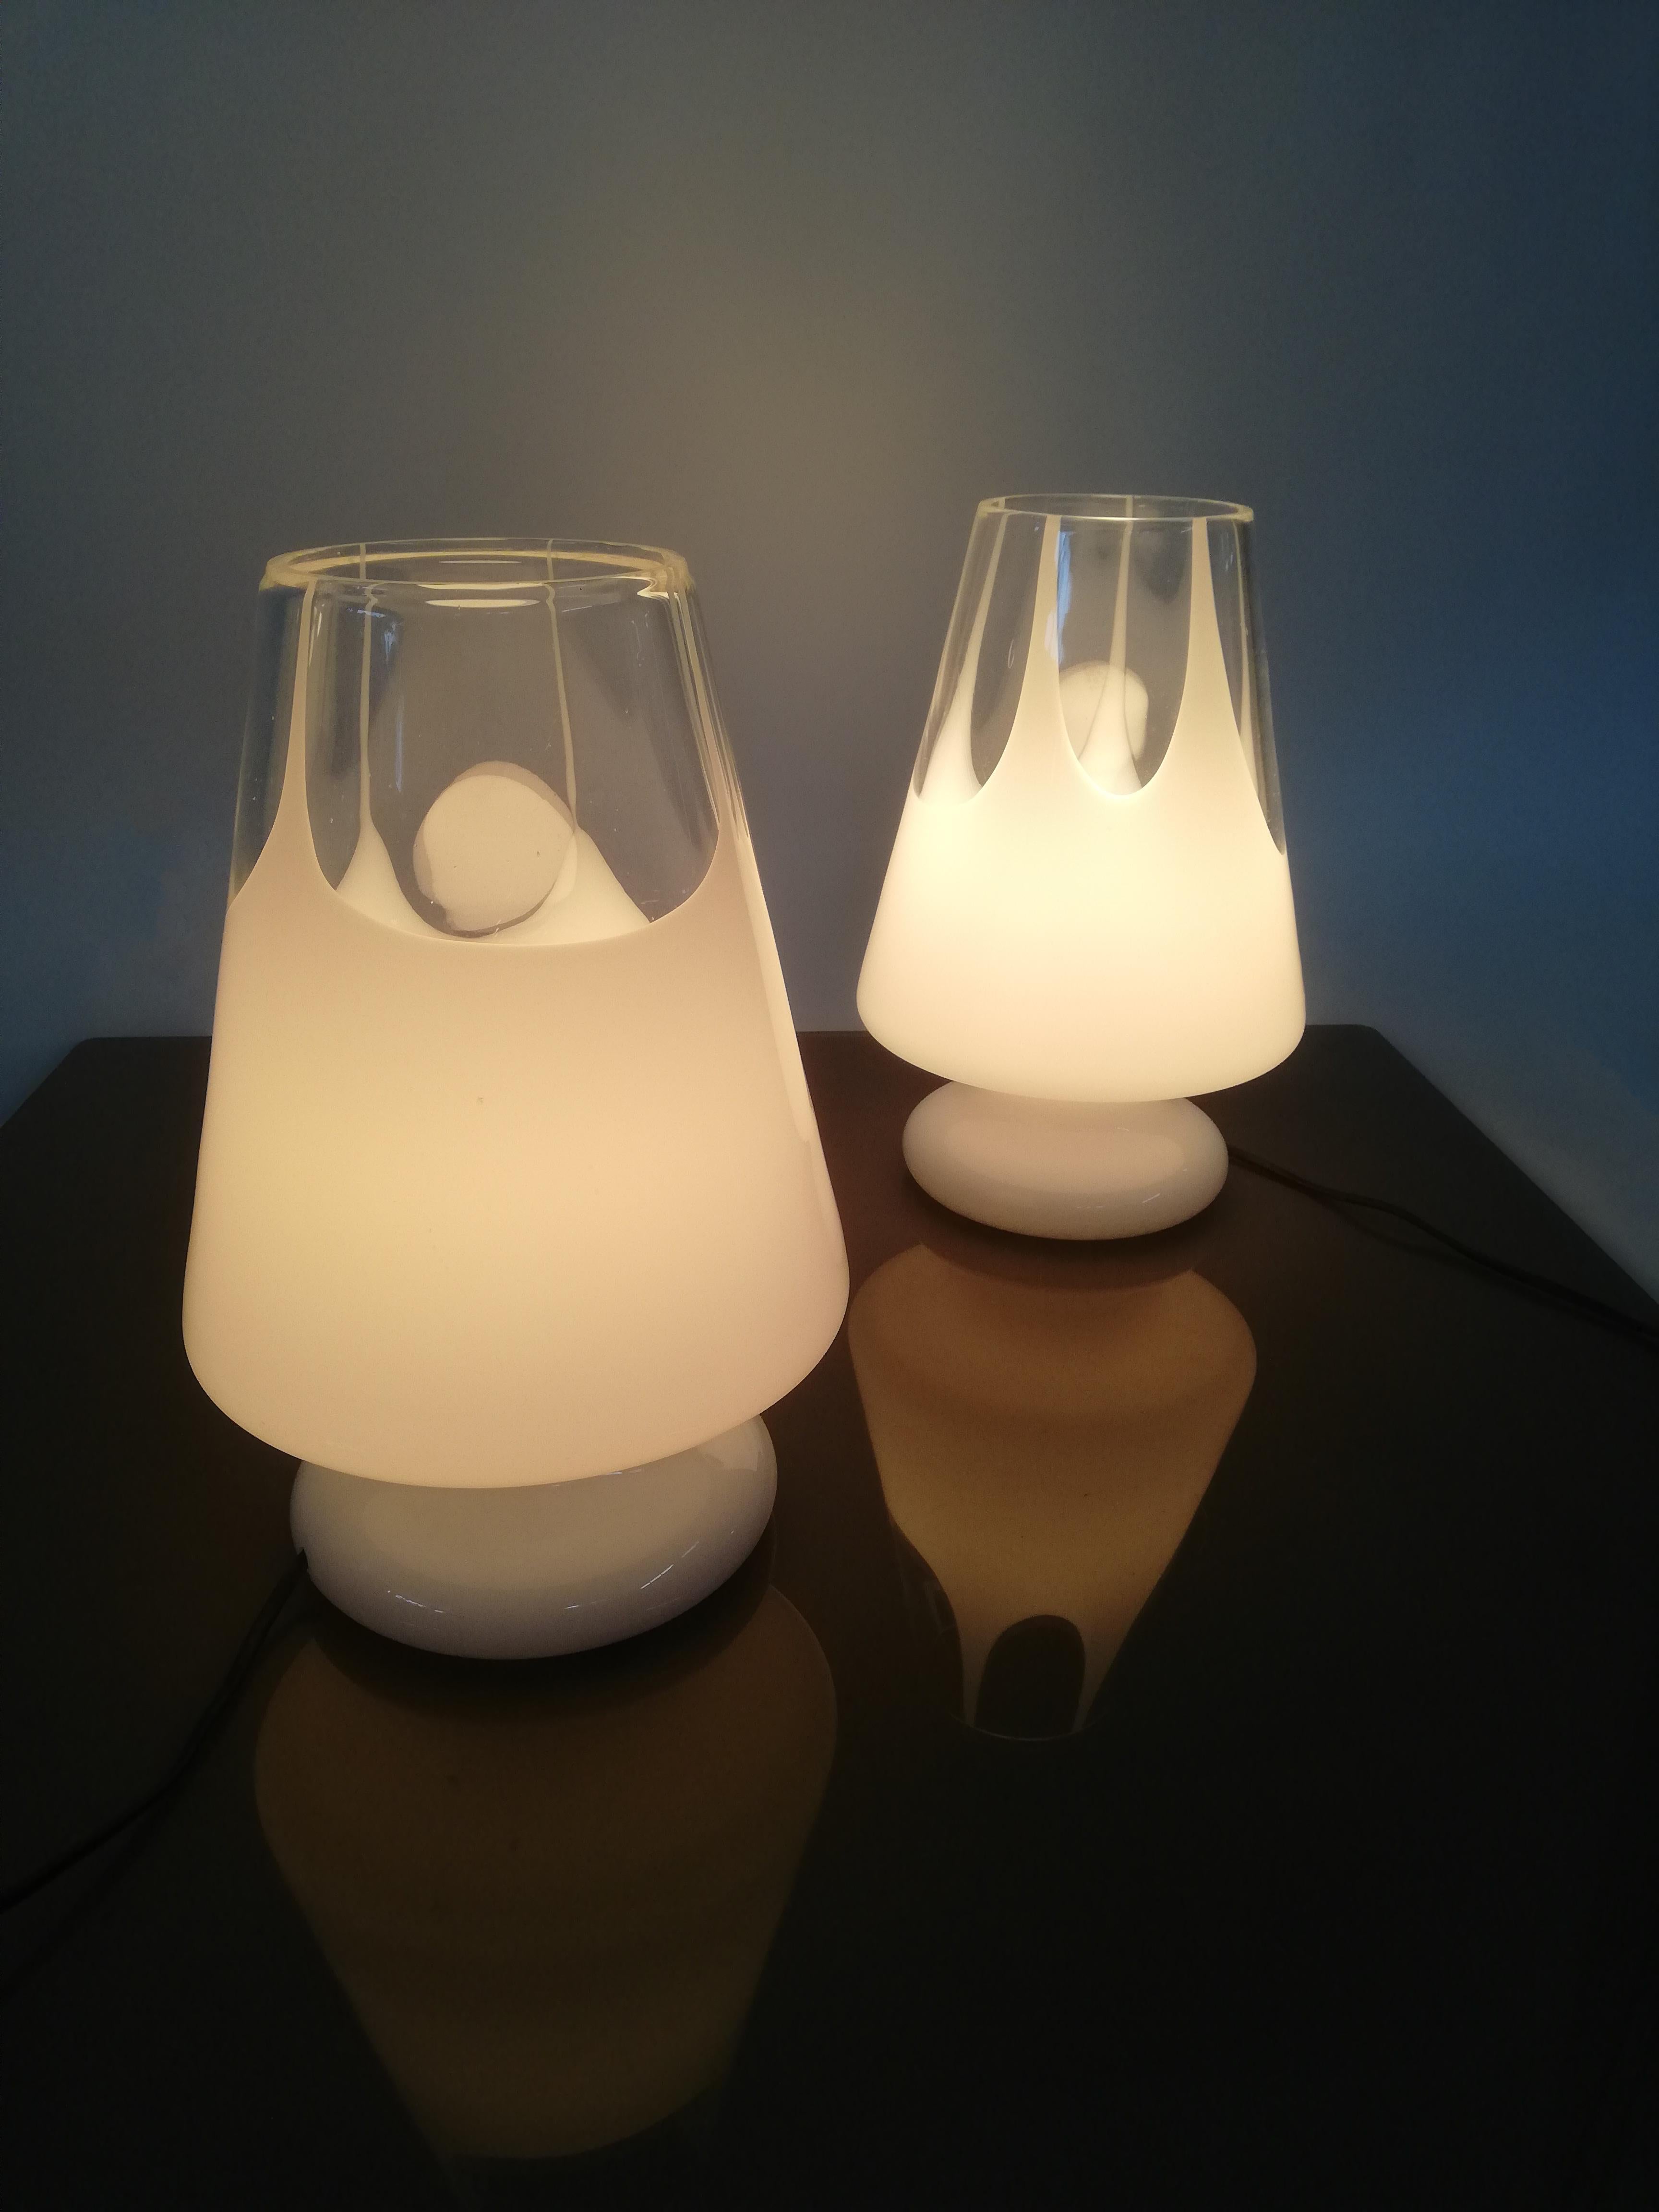 Pair of Table Lamps by Prima Luce in White Artistic Murano Glass, Italy, 1970s For Sale 8